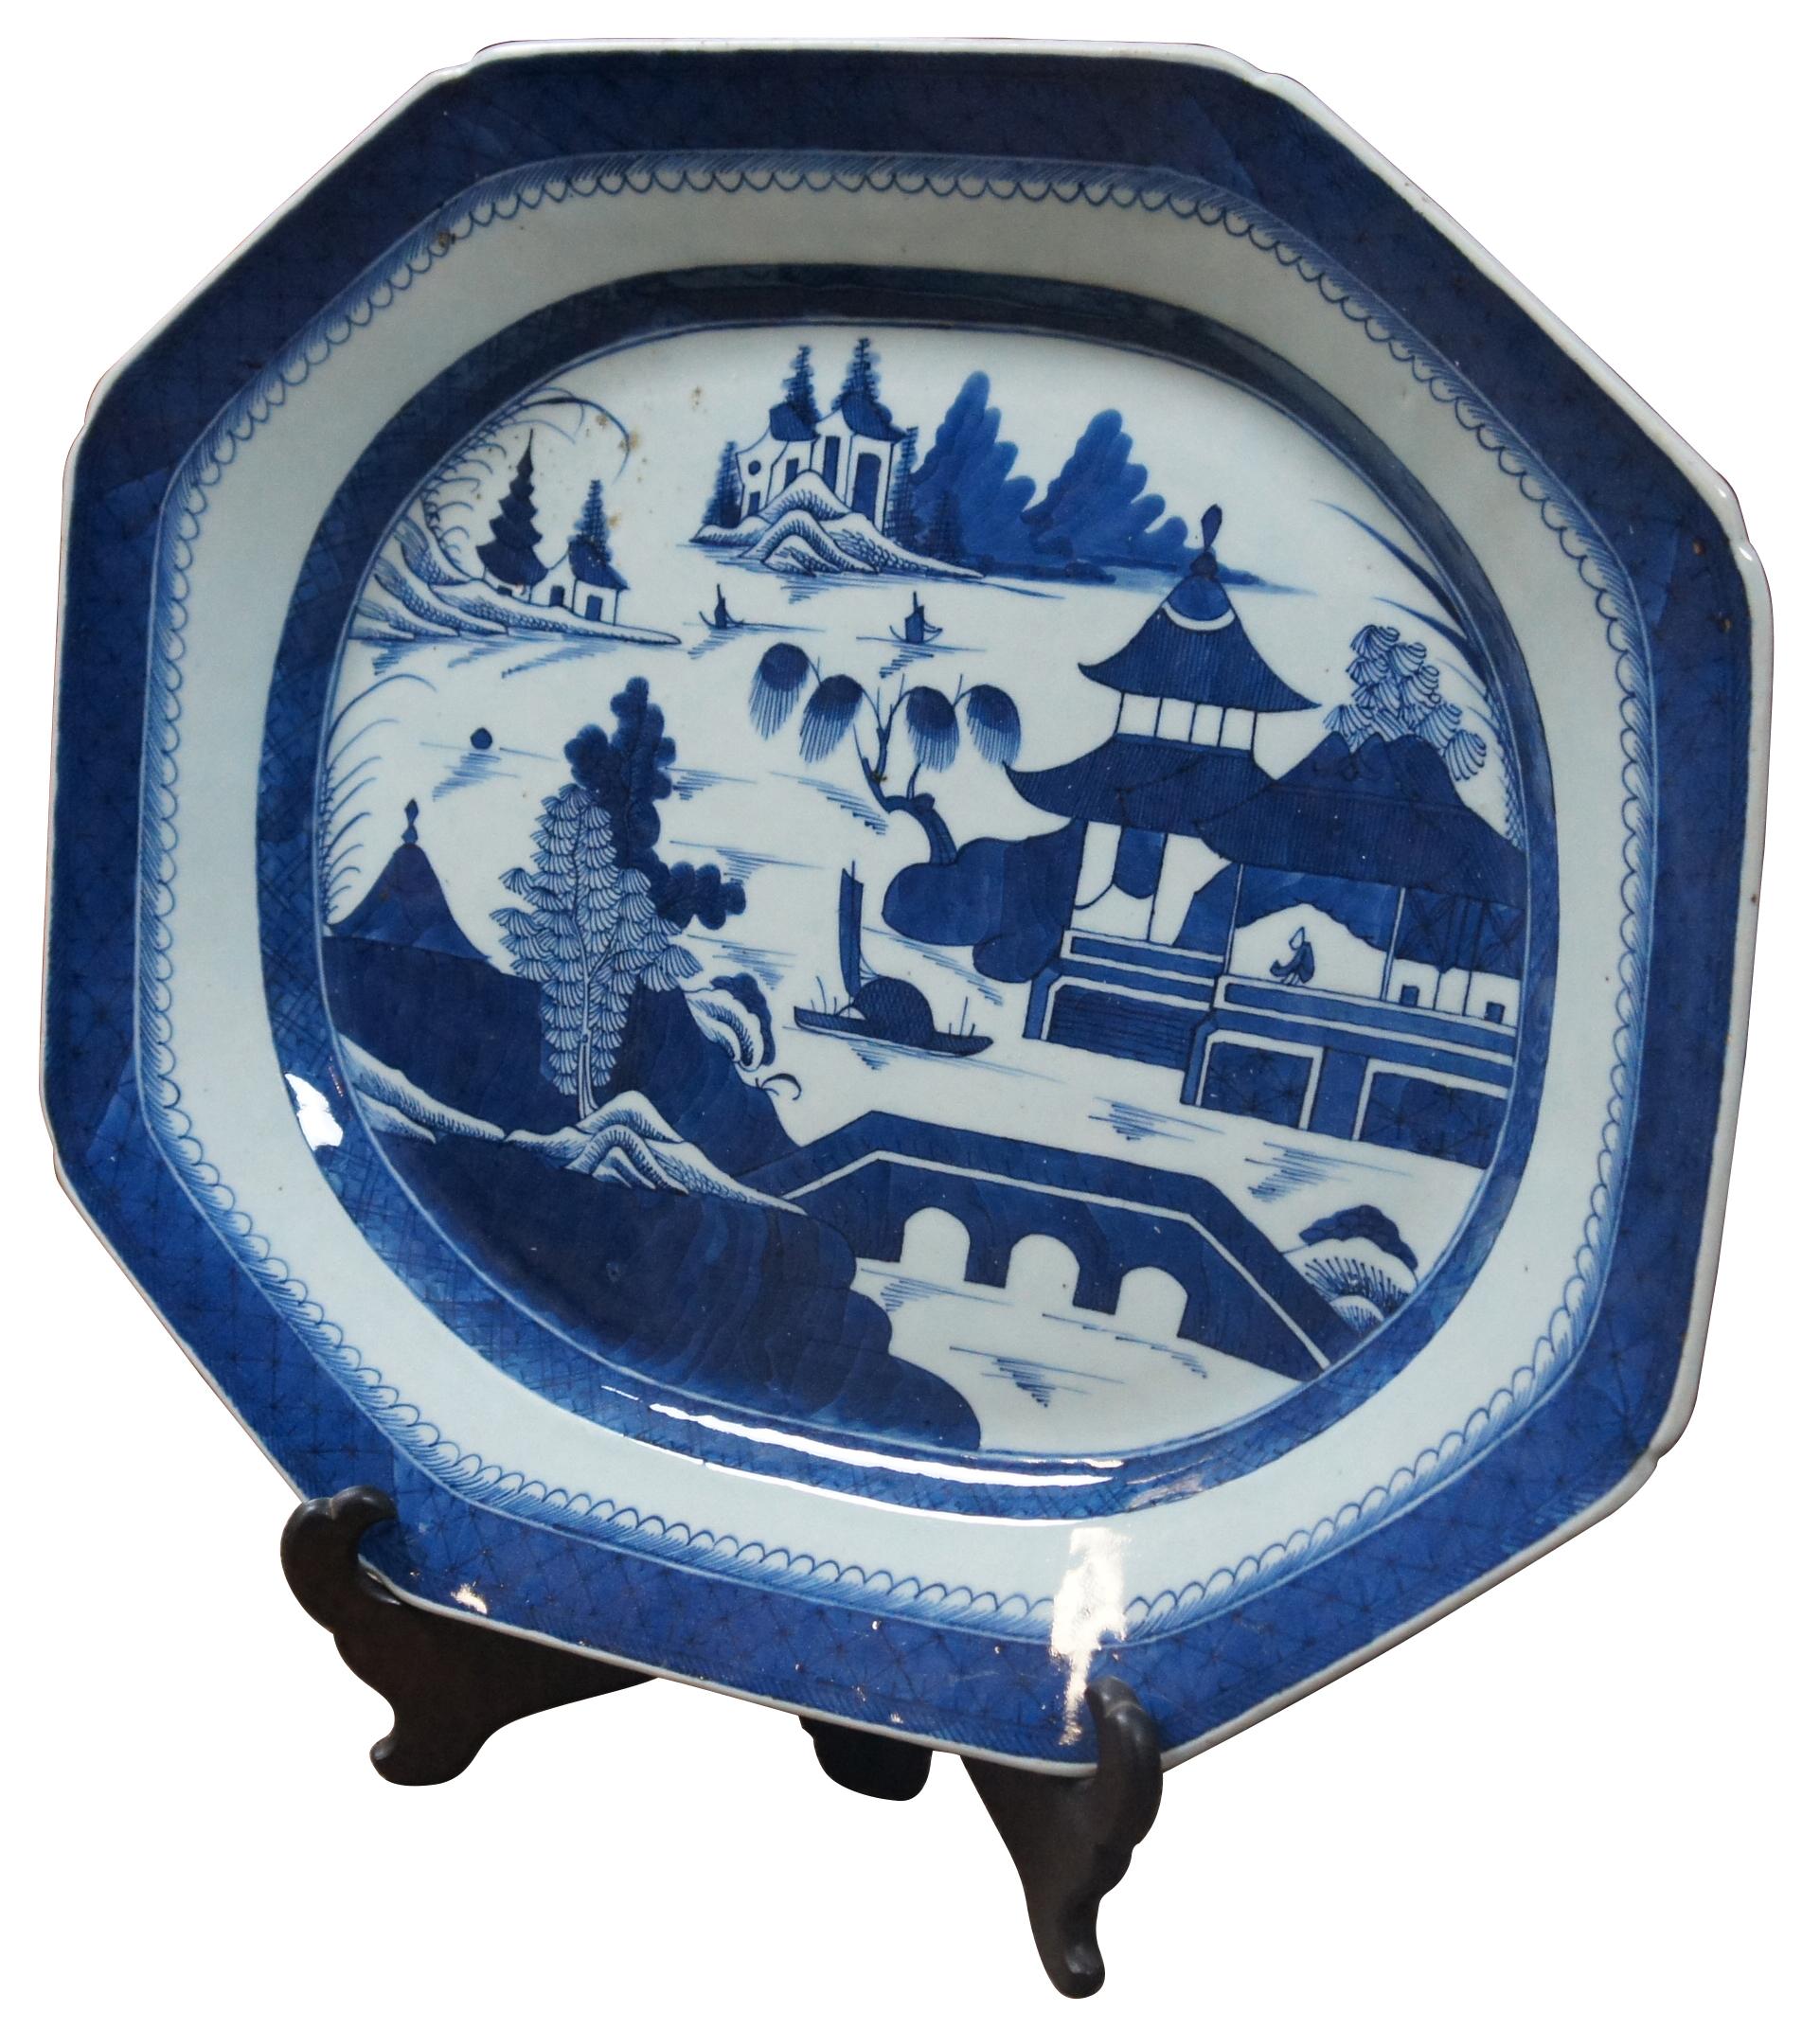 Large 19th century Canton Chinese export platter in blue and white painted porcelain; includes folding wood display Stand. “Canton and Nanking are both patterns of dishes made in China from the late 1700s to the early 1900s. Both are named for